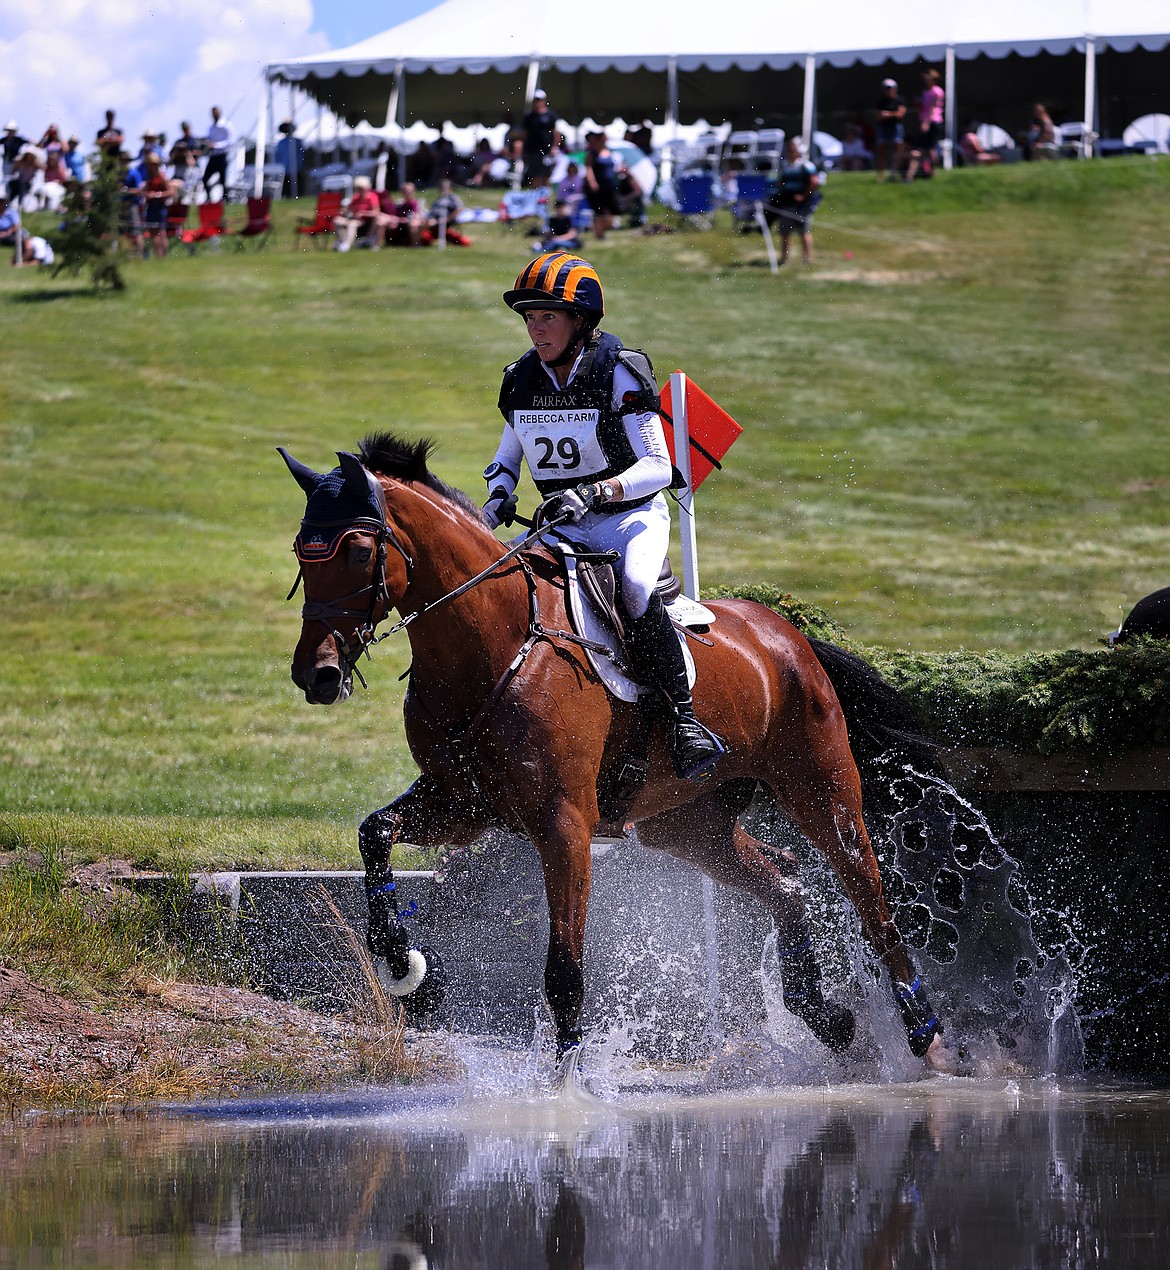 Elisabeth Halliday-Sharp rides "Cooley Nutracker" through the second water feature of the three-star long course at The Event at Rebecca Farm July 23. (Jeremy Weber/Daily Inter Lake)